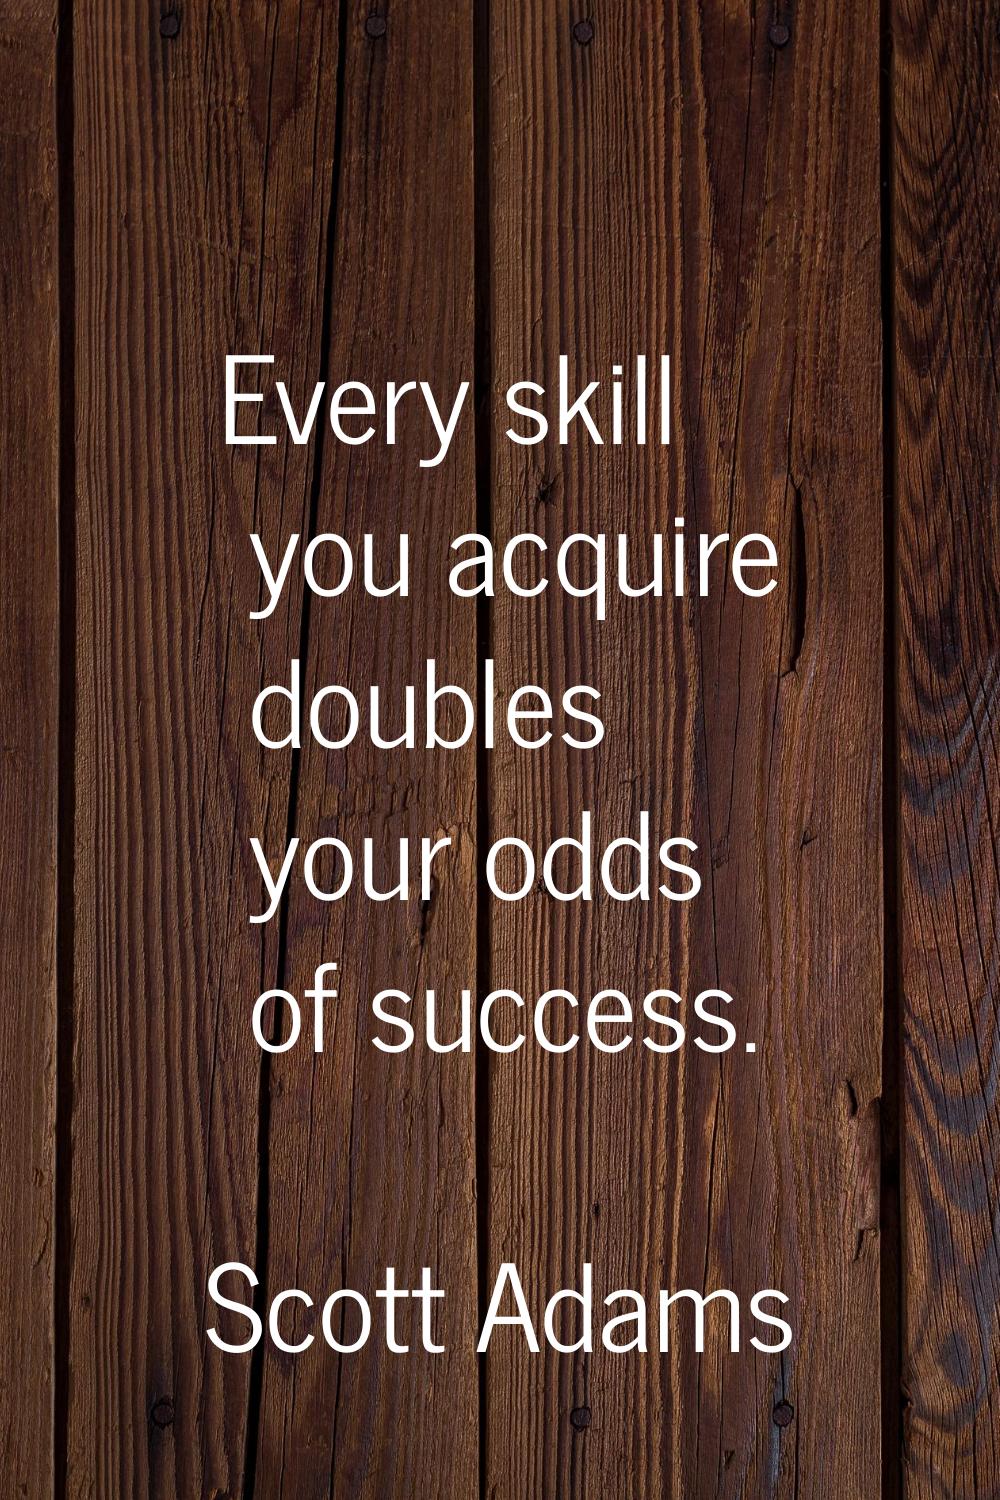 Every skill you acquire doubles your odds of success.